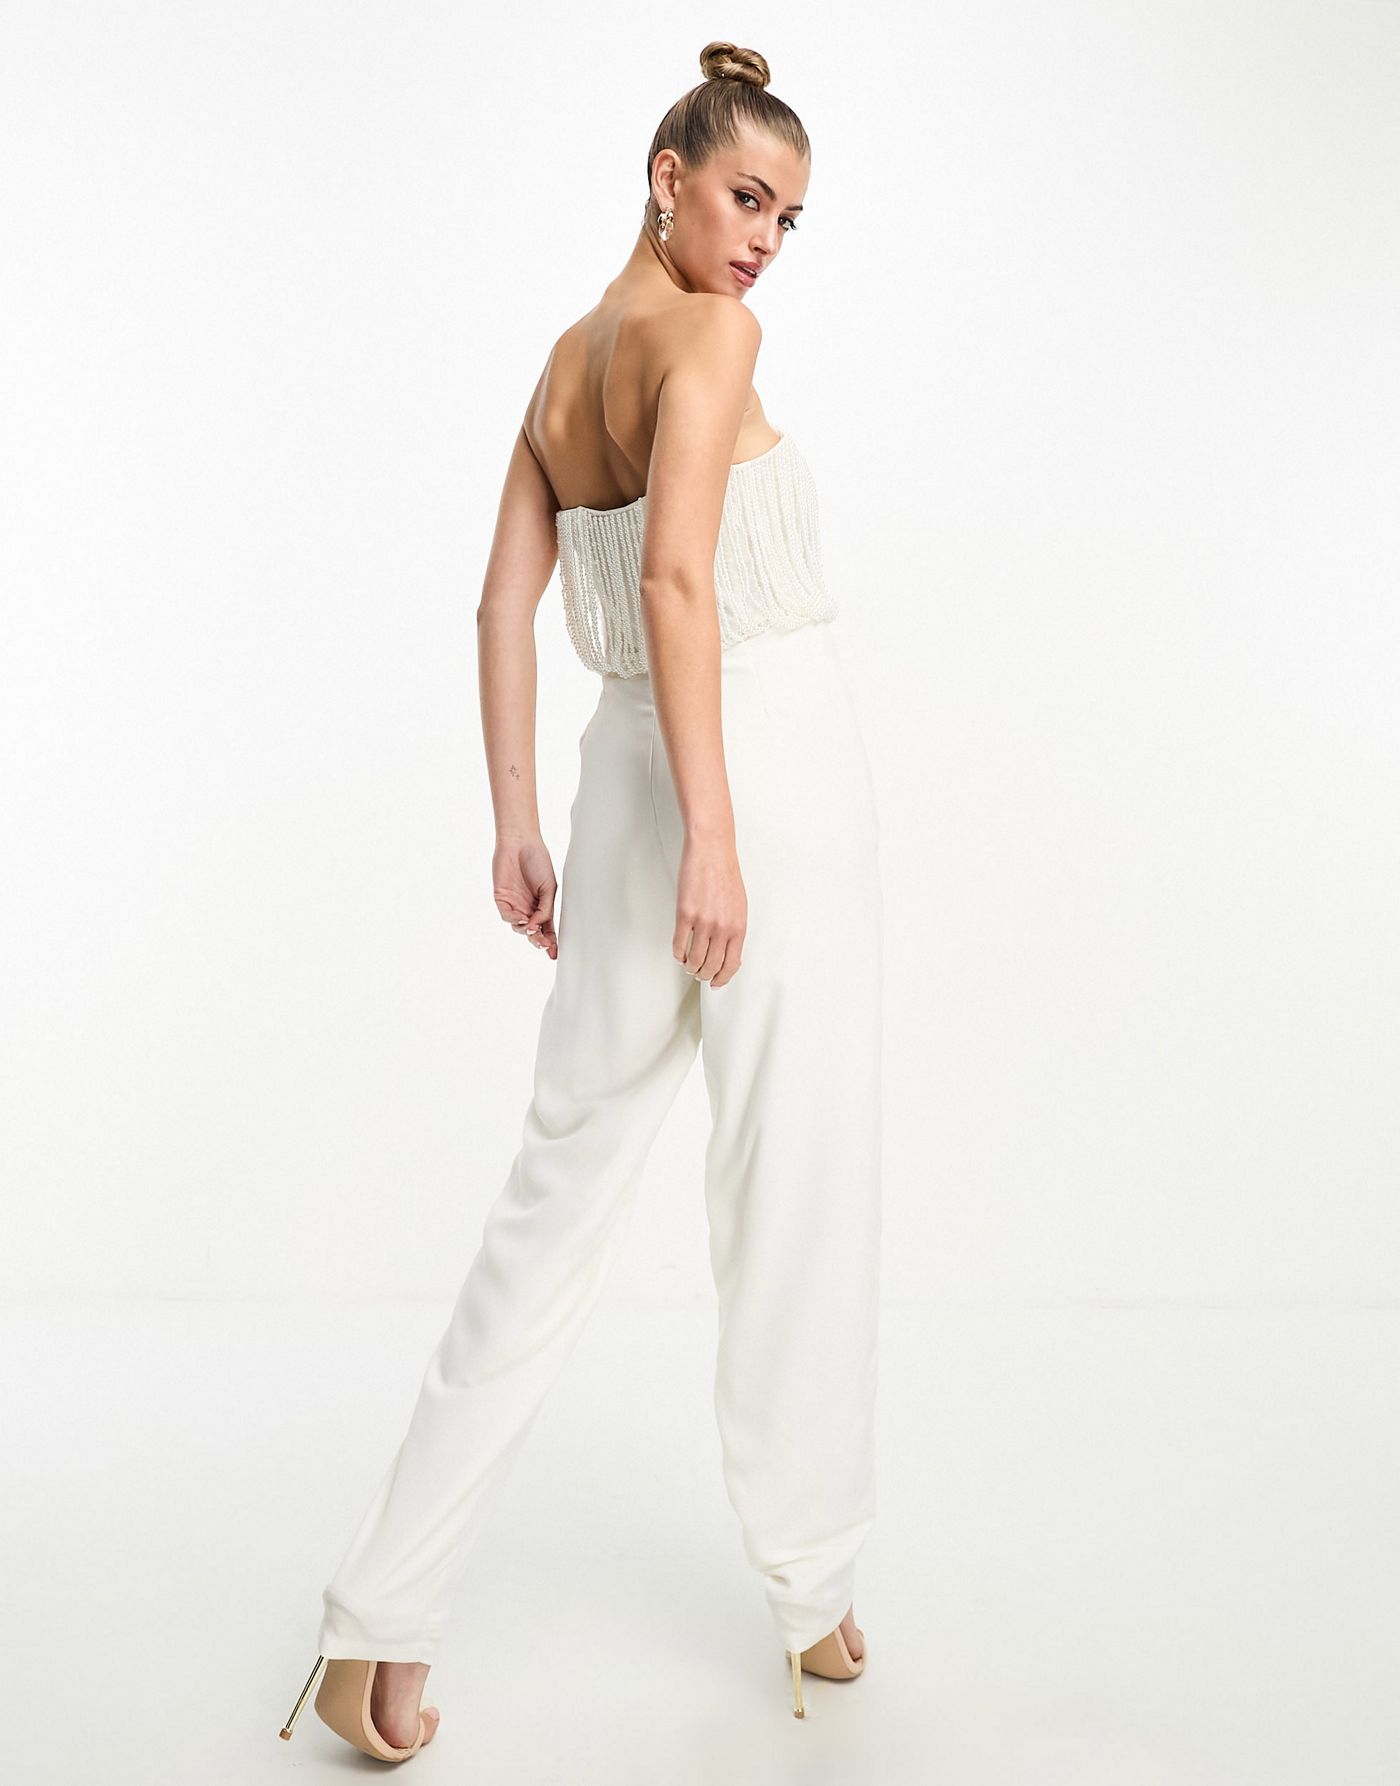 Starlet exclusive embellished wide leg jumpsuit in white